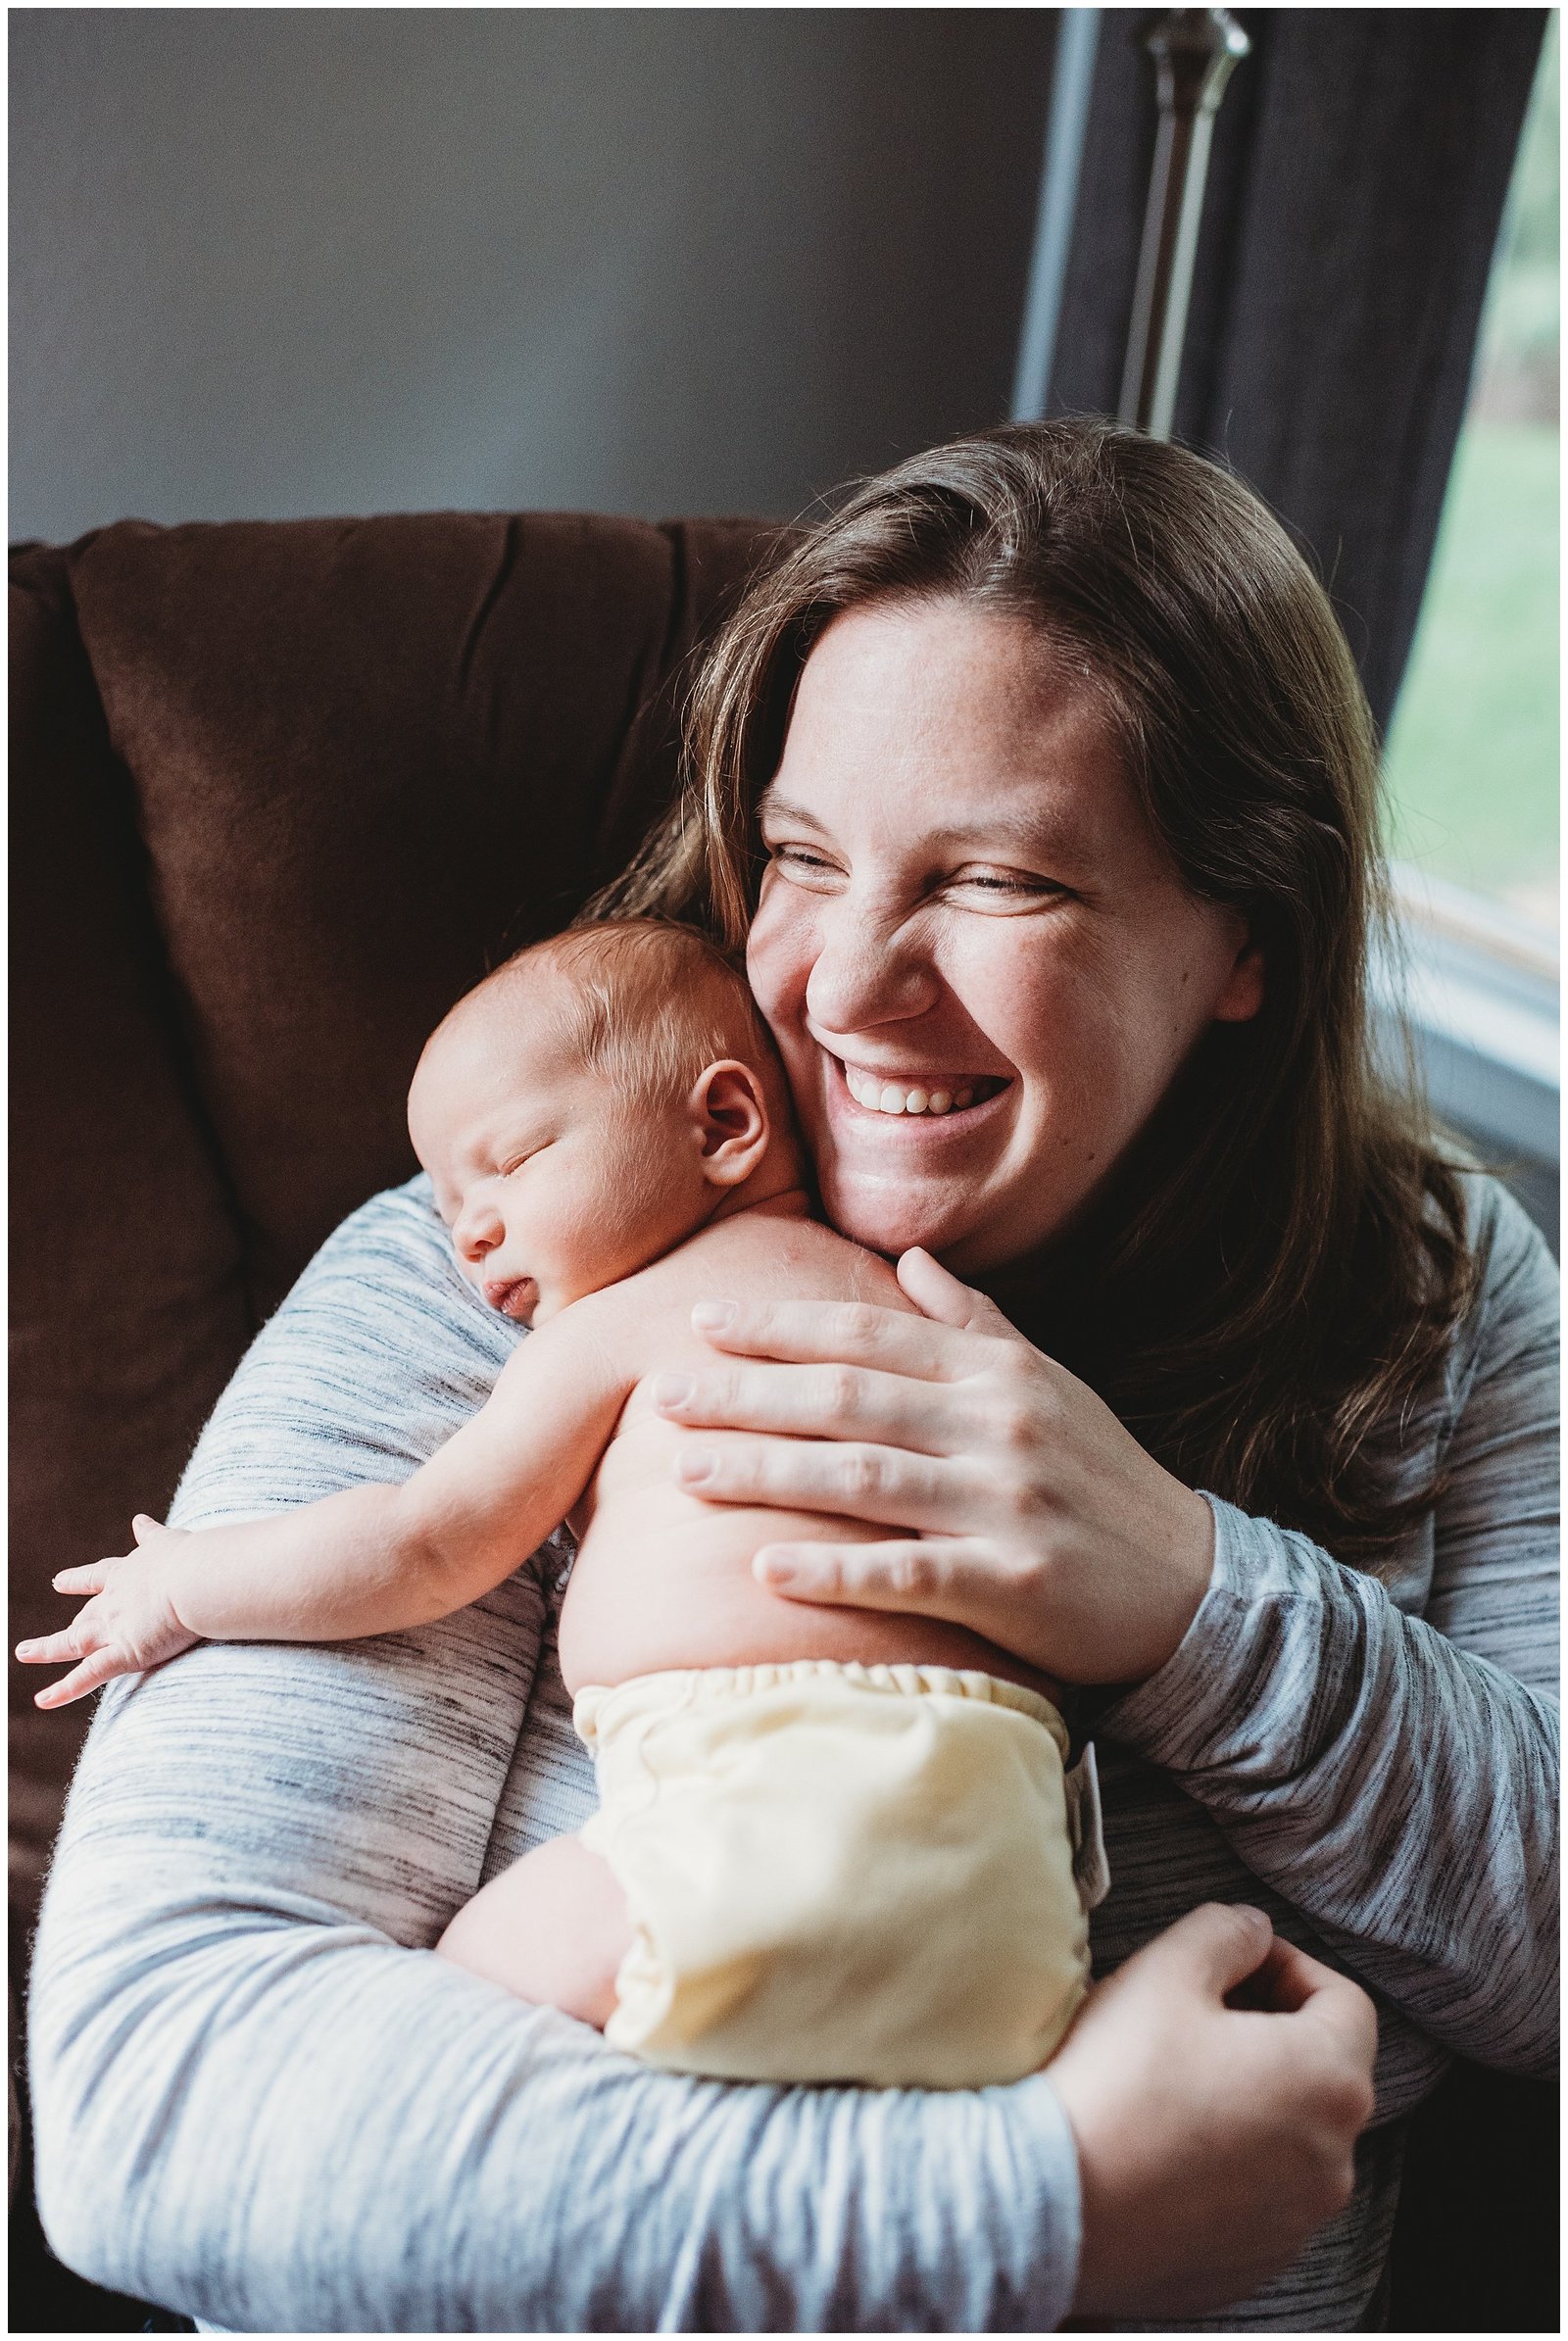 mom giggling holding newborn baby boy Emily Ann Photography Seattle Photographer